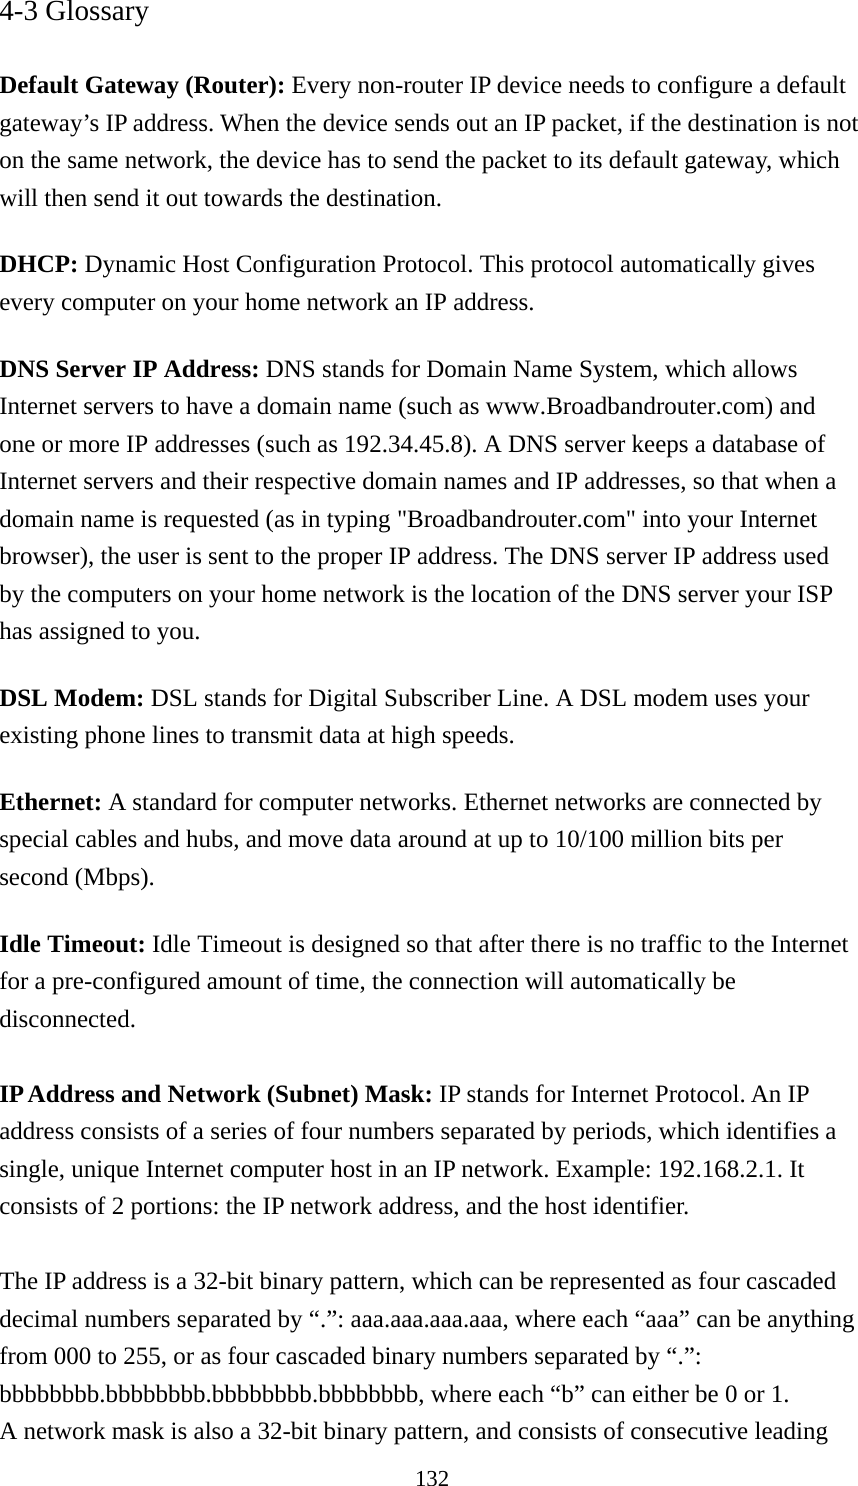 132 4-3 Glossary  Default Gateway (Router): Every non-router IP device needs to configure a default gateway’s IP address. When the device sends out an IP packet, if the destination is not on the same network, the device has to send the packet to its default gateway, which will then send it out towards the destination. DHCP: Dynamic Host Configuration Protocol. This protocol automatically gives every computer on your home network an IP address. DNS Server IP Address: DNS stands for Domain Name System, which allows Internet servers to have a domain name (such as www.Broadbandrouter.com) and one or more IP addresses (such as 192.34.45.8). A DNS server keeps a database of Internet servers and their respective domain names and IP addresses, so that when a domain name is requested (as in typing &quot;Broadbandrouter.com&quot; into your Internet browser), the user is sent to the proper IP address. The DNS server IP address used by the computers on your home network is the location of the DNS server your ISP has assigned to you.   DSL Modem: DSL stands for Digital Subscriber Line. A DSL modem uses your existing phone lines to transmit data at high speeds.   Ethernet: A standard for computer networks. Ethernet networks are connected by special cables and hubs, and move data around at up to 10/100 million bits per second (Mbps).   Idle Timeout: Idle Timeout is designed so that after there is no traffic to the Internet for a pre-configured amount of time, the connection will automatically be disconnected.  IP Address and Network (Subnet) Mask: IP stands for Internet Protocol. An IP address consists of a series of four numbers separated by periods, which identifies a single, unique Internet computer host in an IP network. Example: 192.168.2.1. It consists of 2 portions: the IP network address, and the host identifier.  The IP address is a 32-bit binary pattern, which can be represented as four cascaded decimal numbers separated by “.”: aaa.aaa.aaa.aaa, where each “aaa” can be anything from 000 to 255, or as four cascaded binary numbers separated by “.”: bbbbbbbb.bbbbbbbb.bbbbbbbb.bbbbbbbb, where each “b” can either be 0 or 1. A network mask is also a 32-bit binary pattern, and consists of consecutive leading 